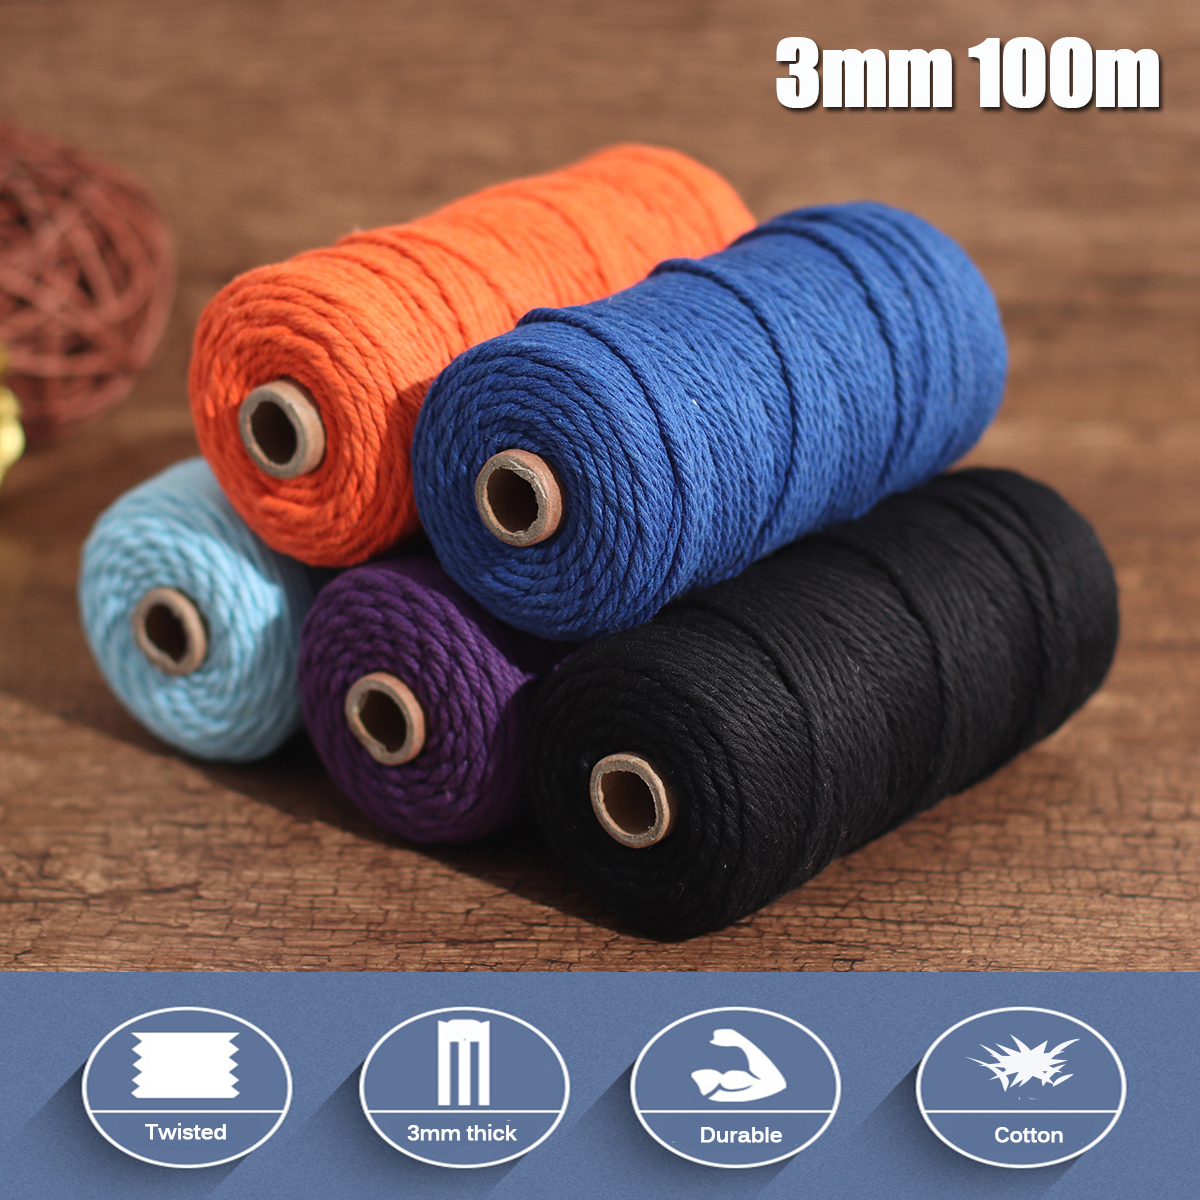 5-Color-3mm-100M-DIY-Long-Macrame-Colorful-Cotton-Twisted-Cord-Rope-Hand-Crafts-String-Braided-Wire-1387427-3